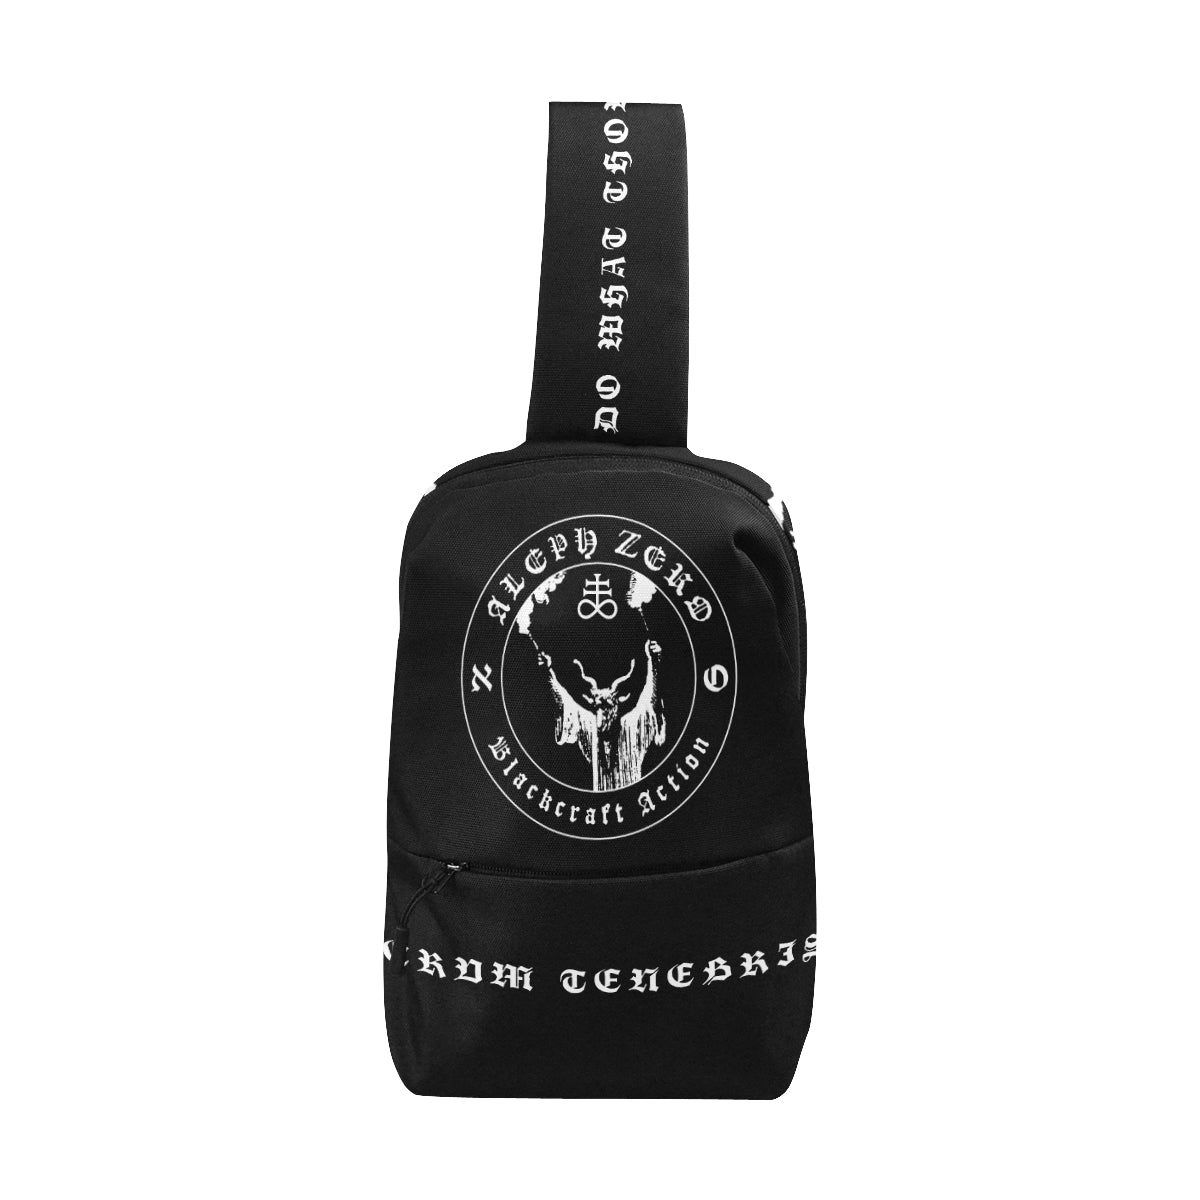 The Baphomet Chest Bag